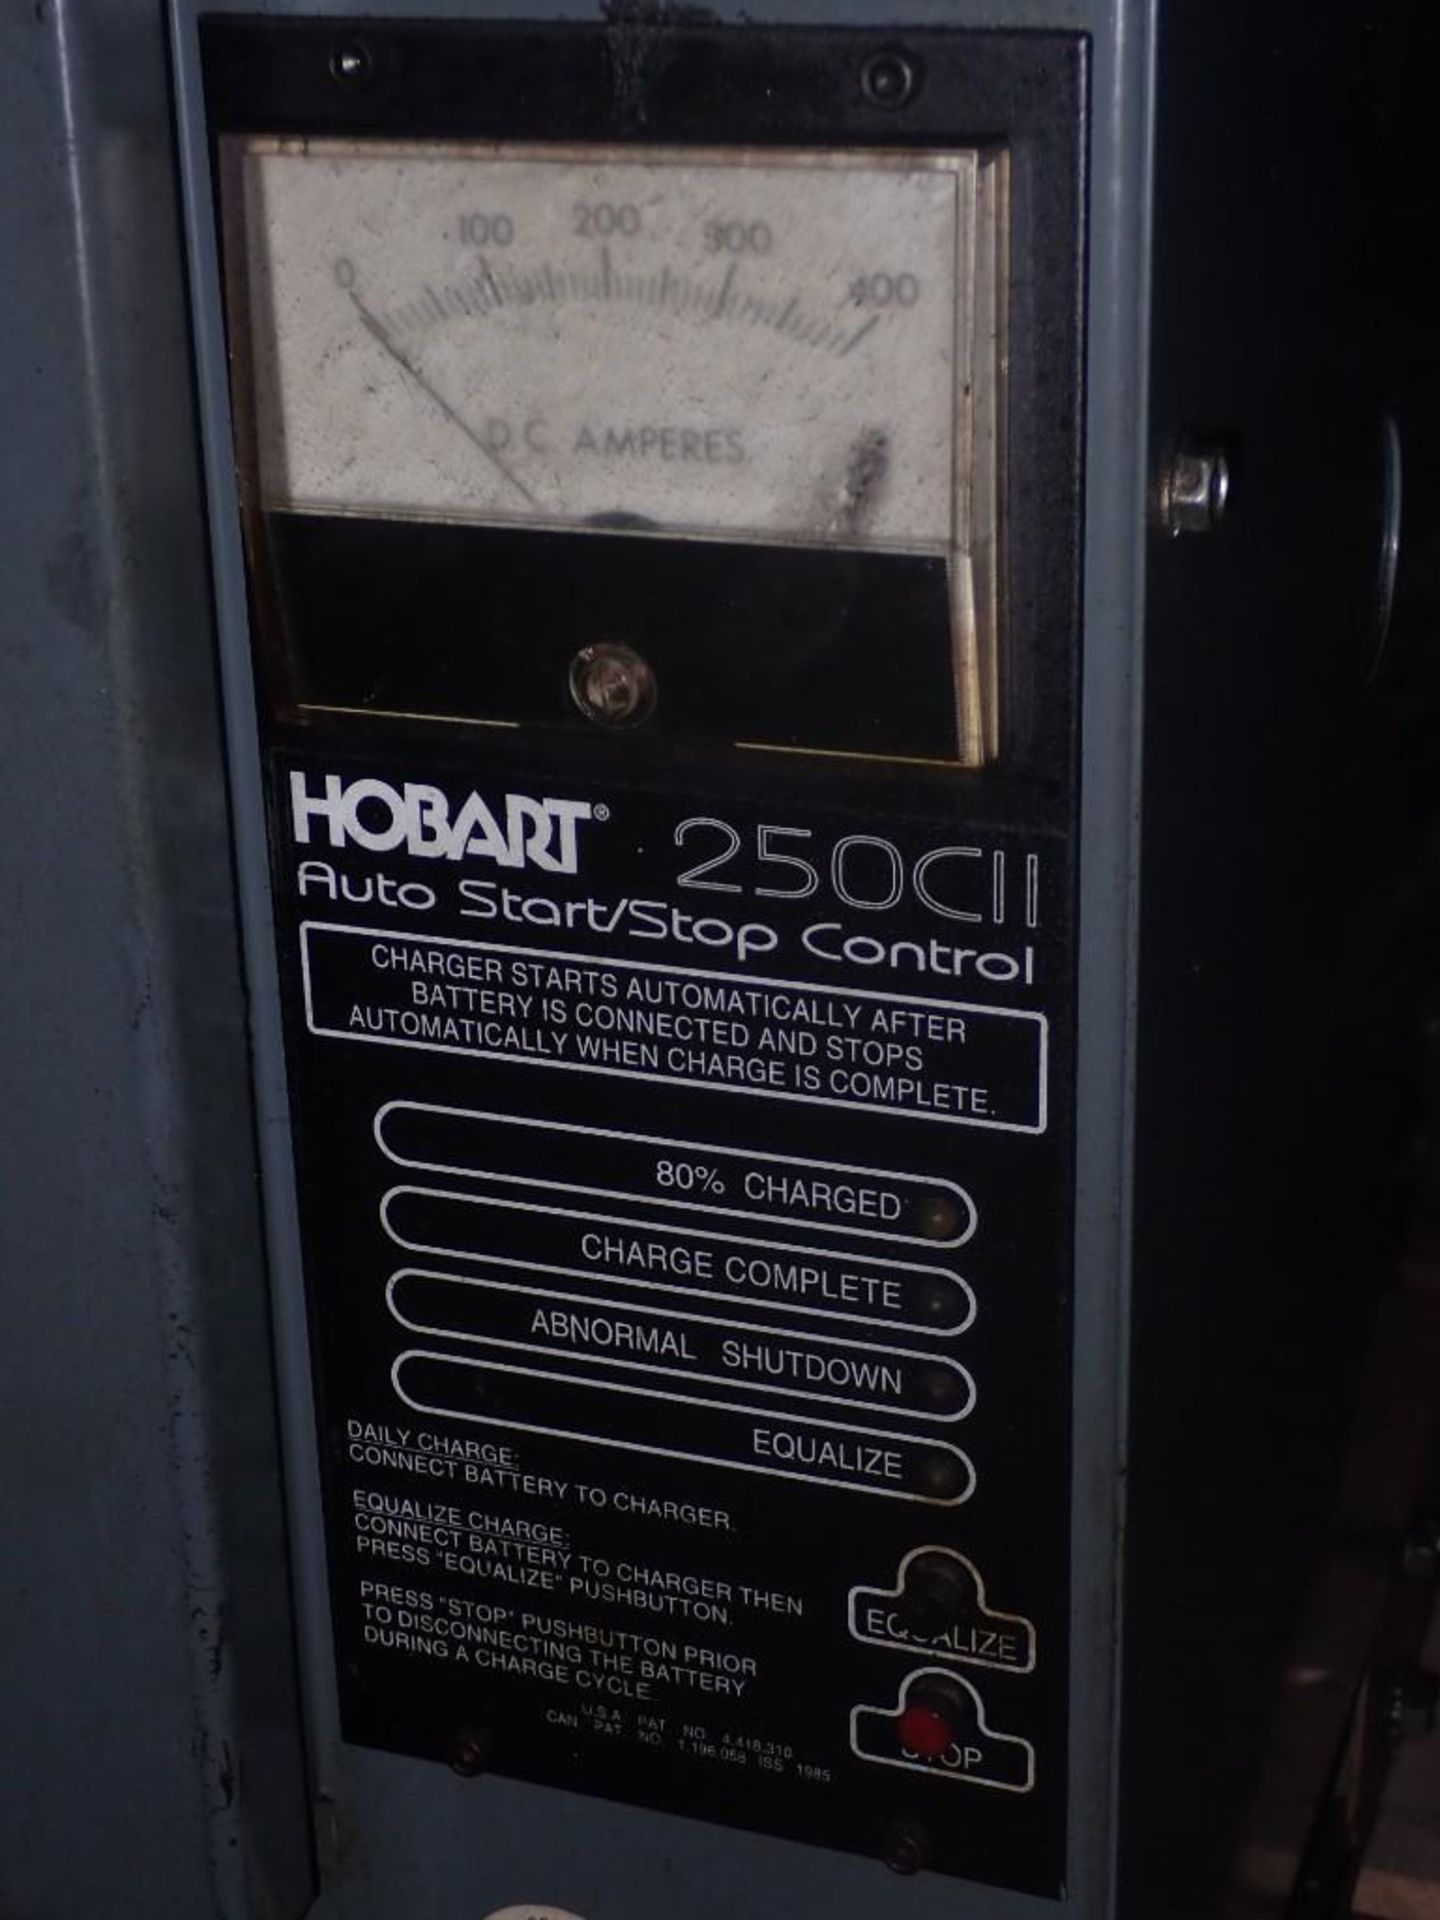 24 Volt Hobart Accu Charger #250CII Battery Charger - Image 3 of 4